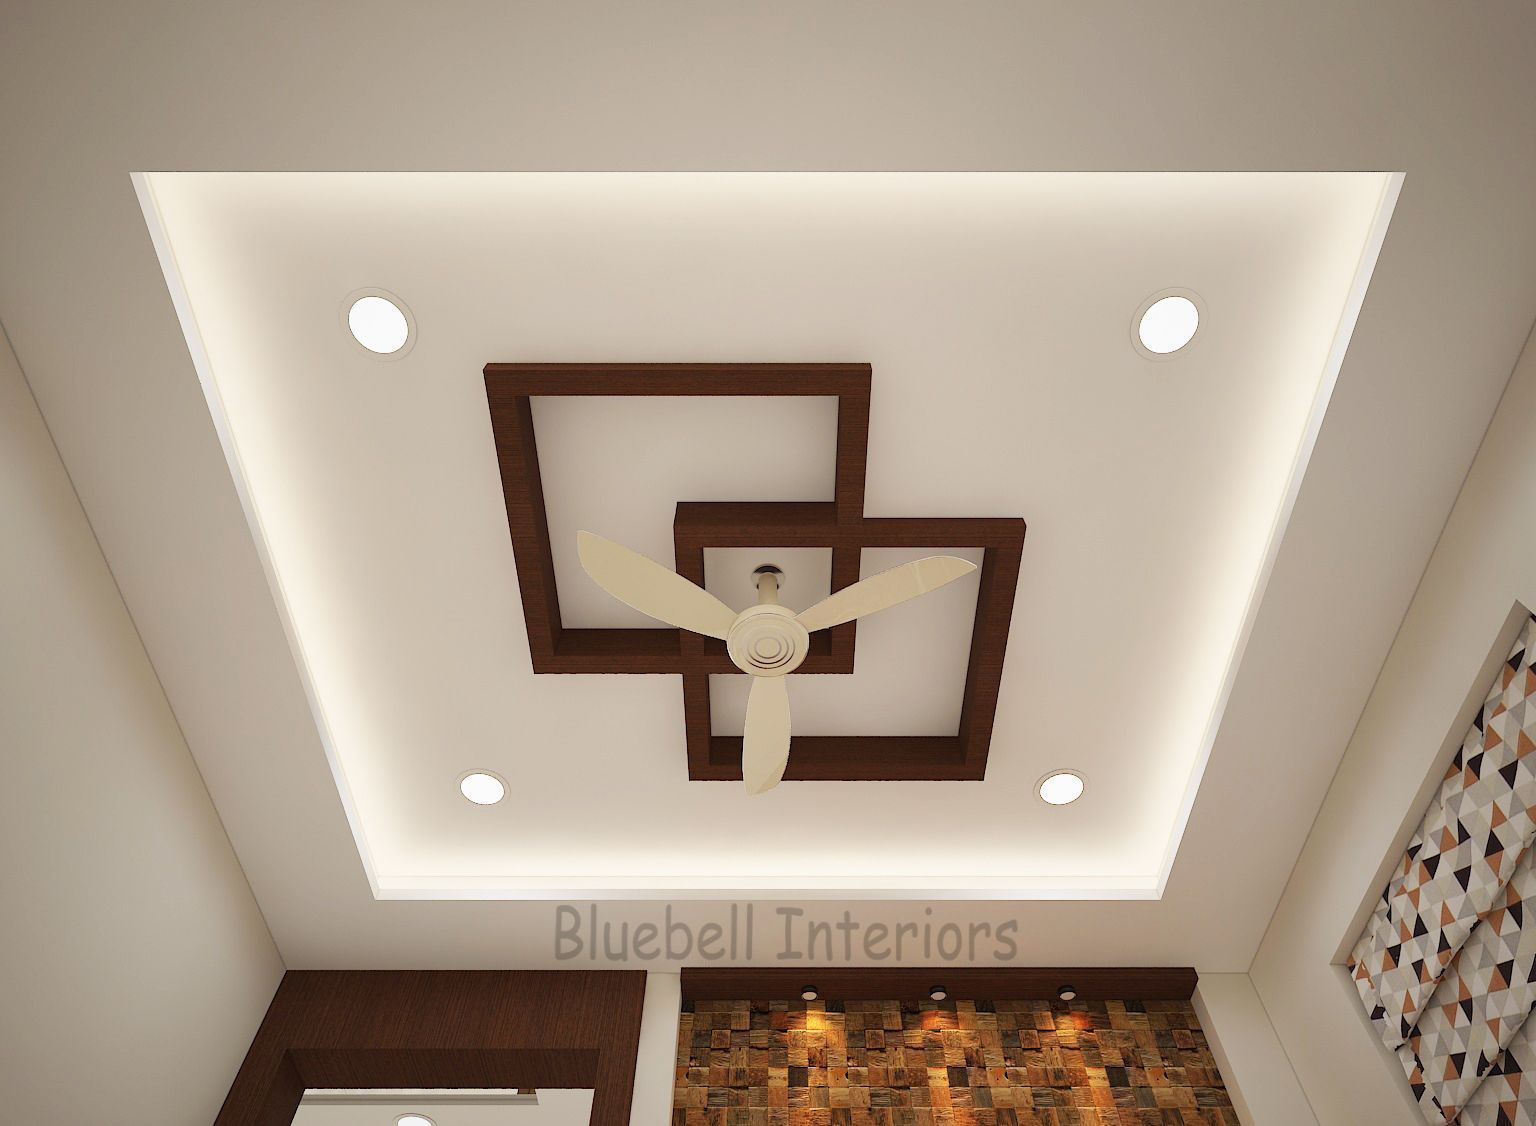 dining room fall ceiling design